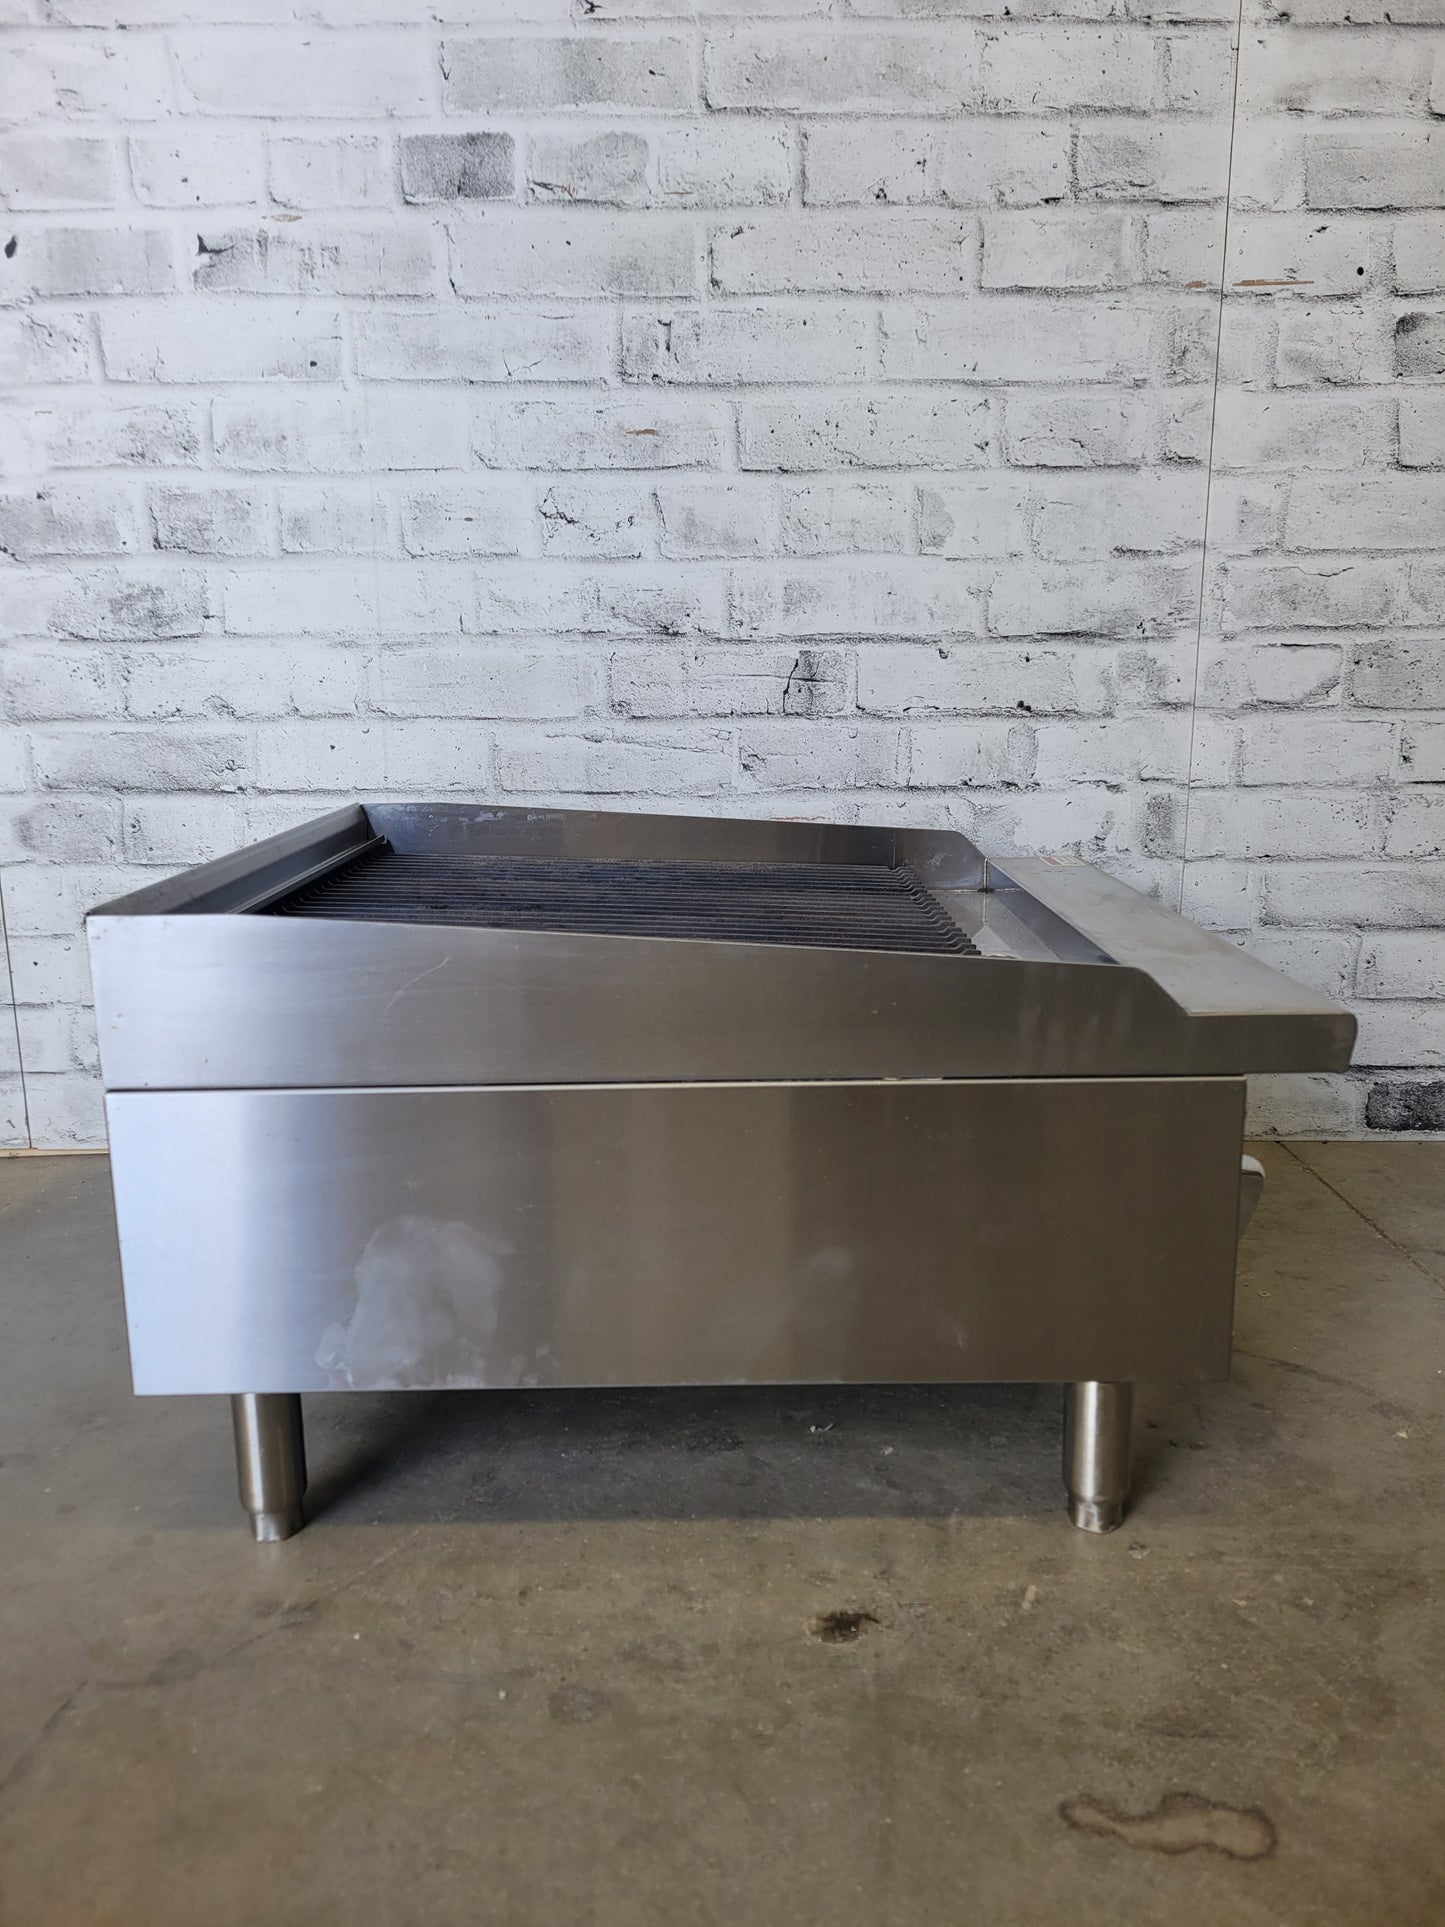 CookRite 24" Heavy Duty Radiant Charbroiler NG